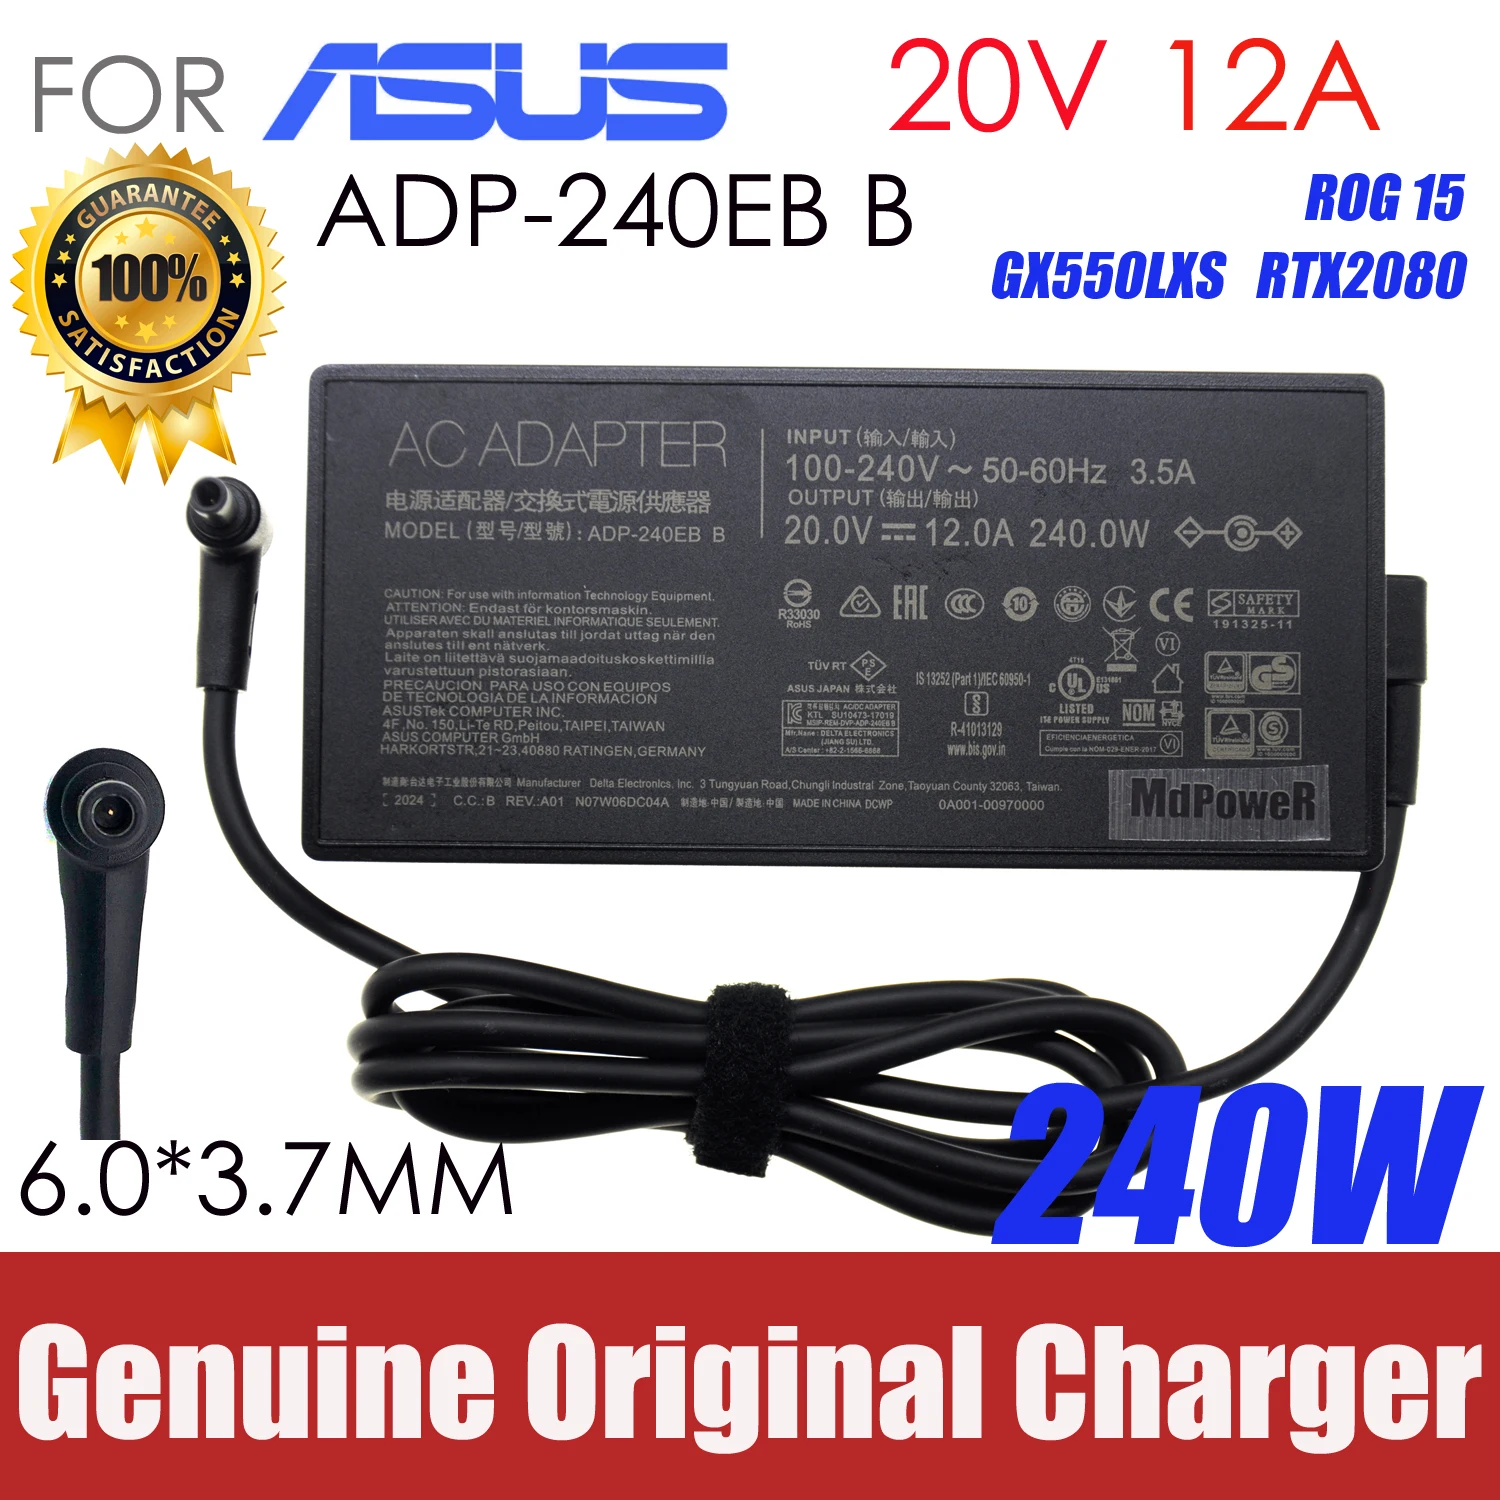 Genuine ADP-240EB B 20V 12A 240W AC Adapter Laptop Charger For ASUS ROG 15 GX550LXS RTX2080 Power Supply 6.0 x 3.5mm